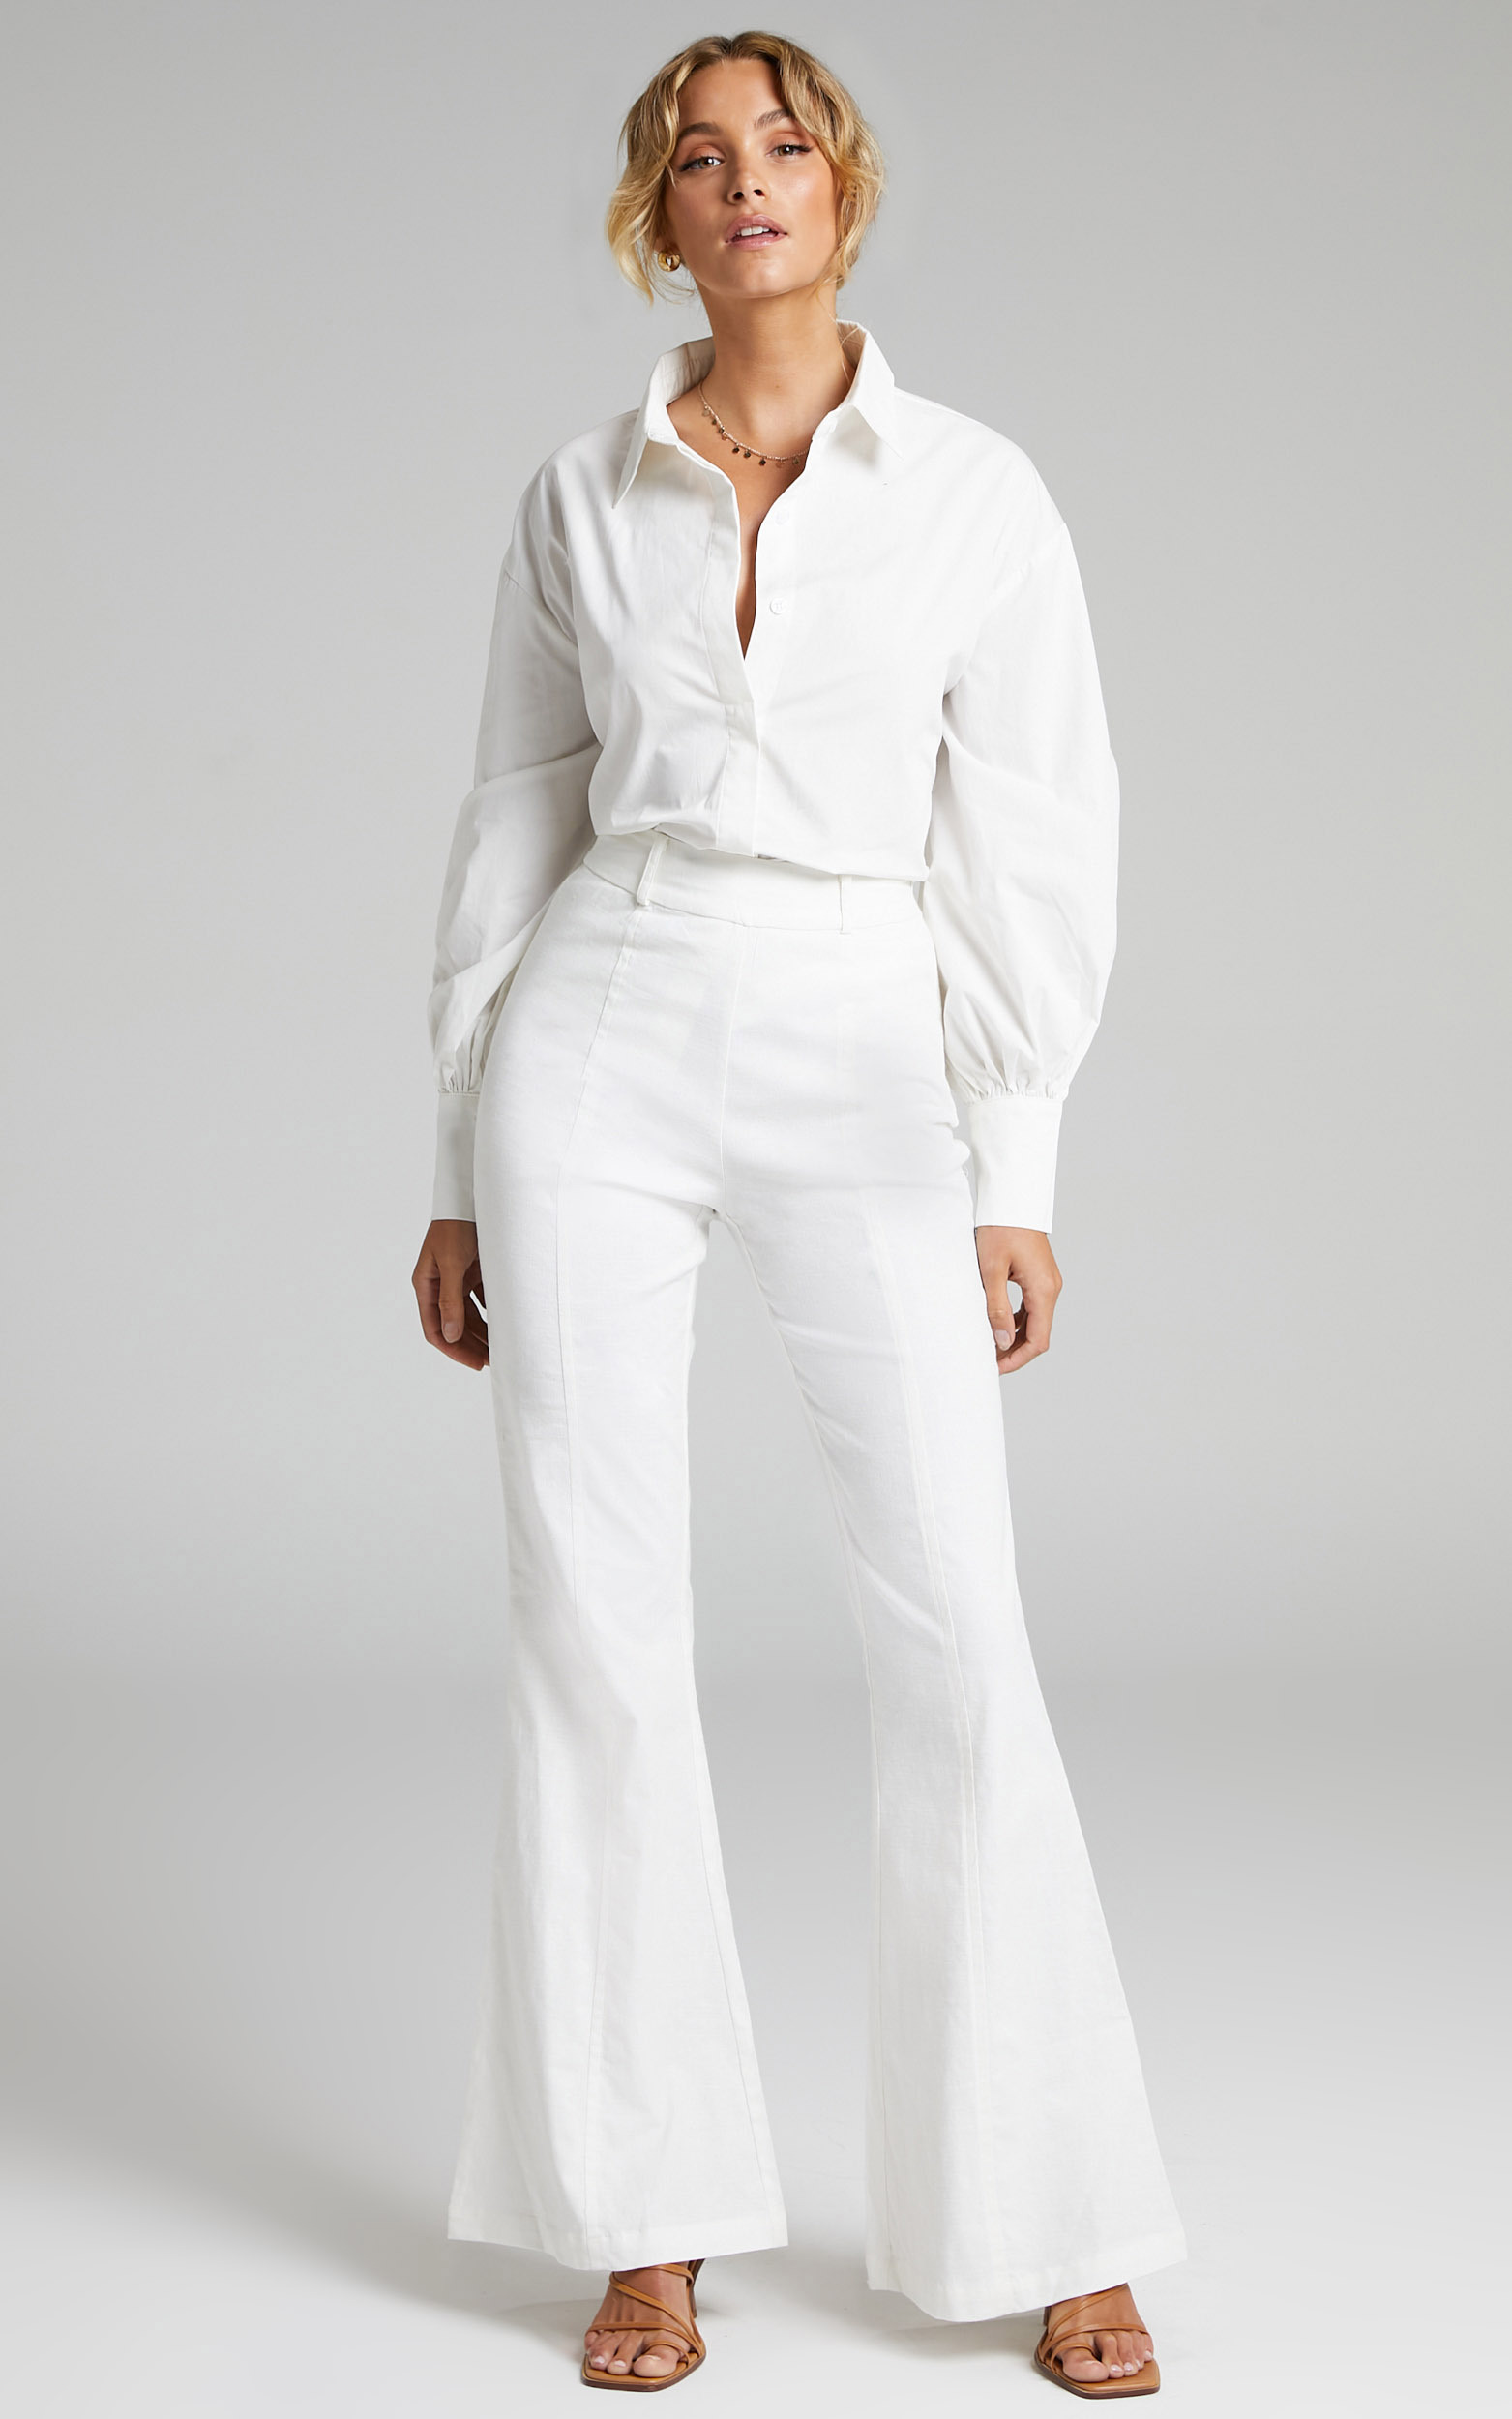 Chielo High Rise Fit and Flare Pant in White - 04, WHT1, hi-res image number null